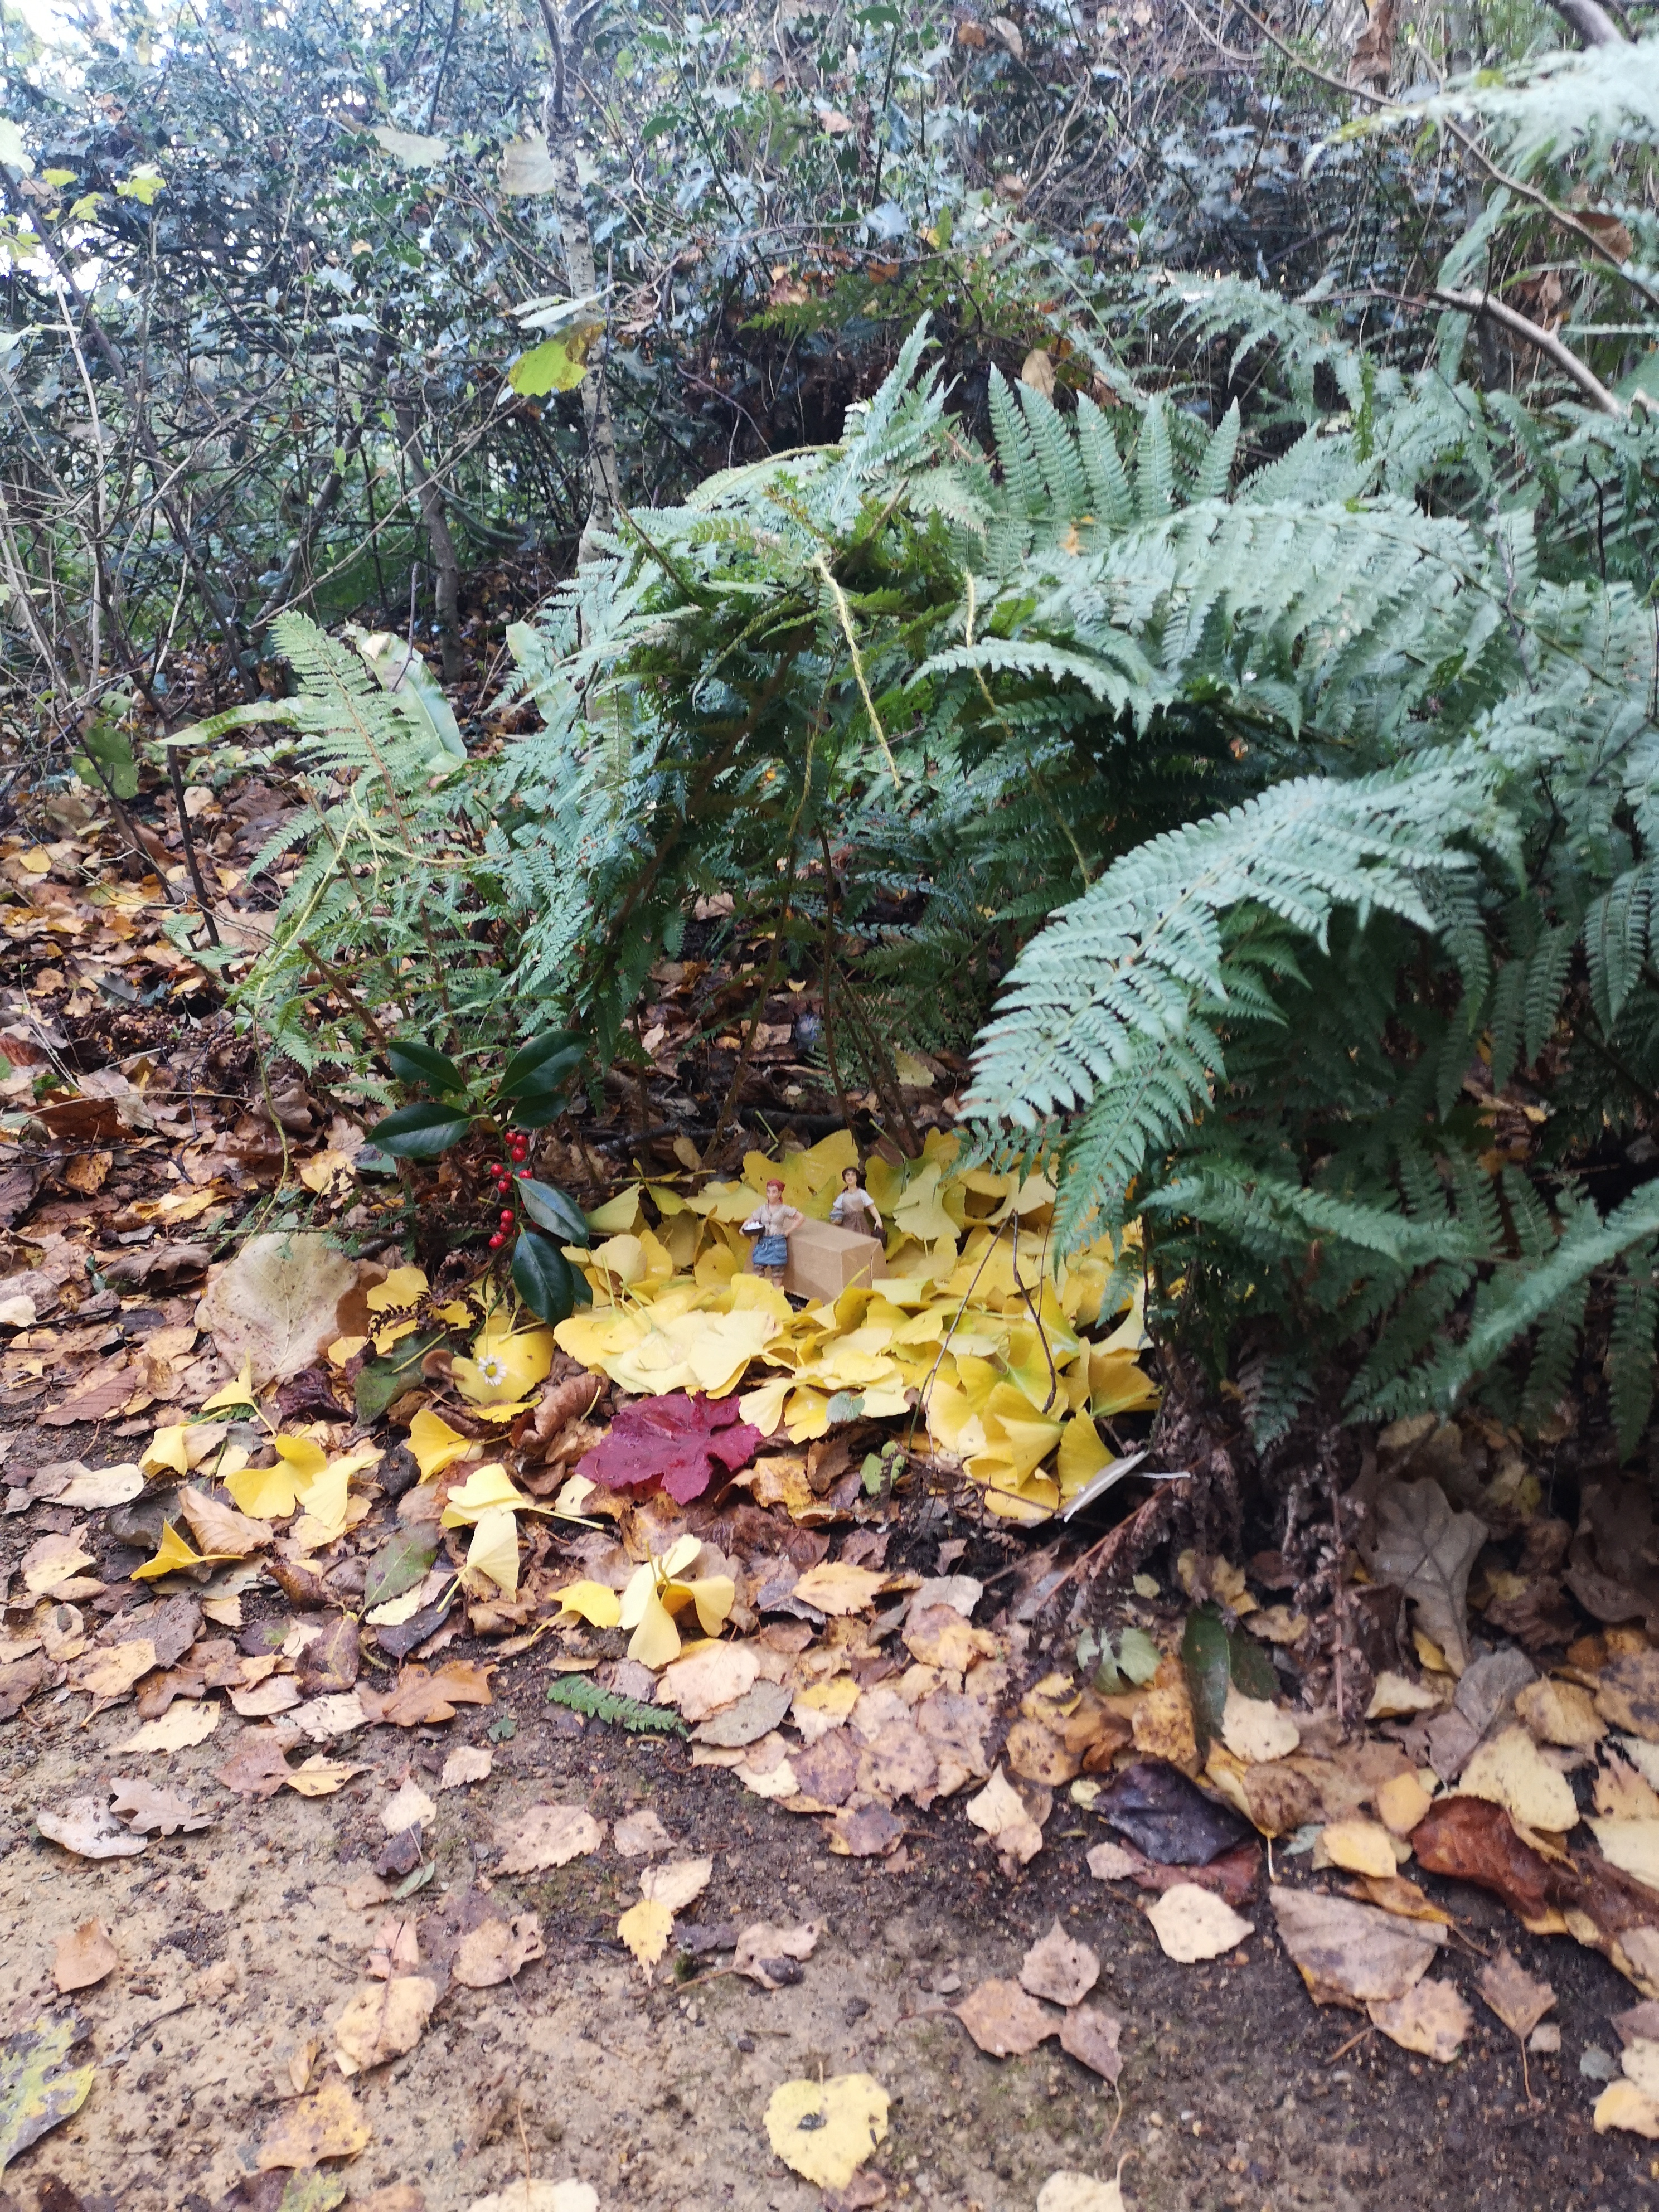 a small hand-made shelter under fern leaves brightened by a carpet of ginkgo leaves